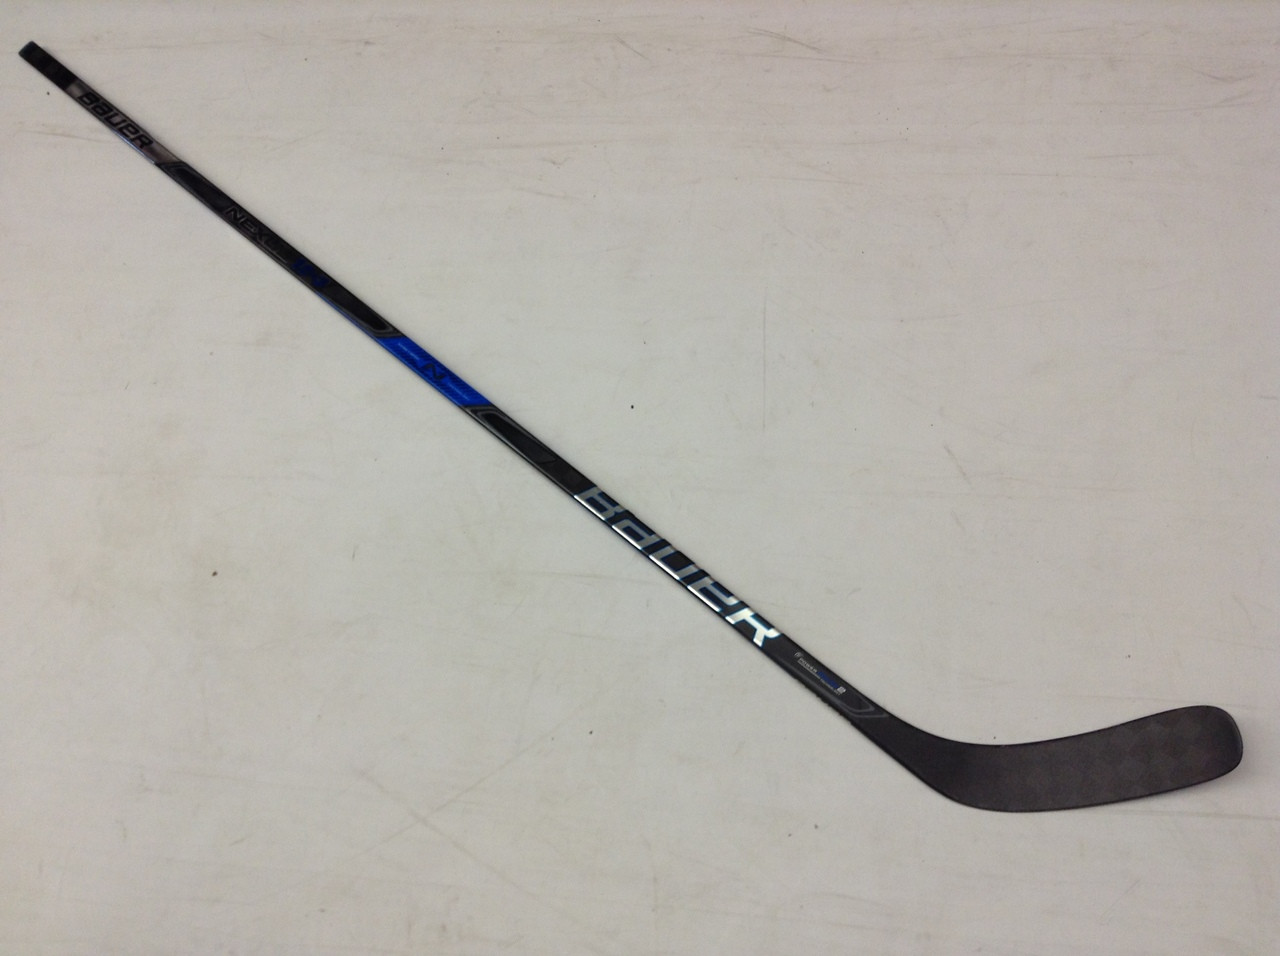 Here's a closer look at the stick specs - Pro Stock Hockey